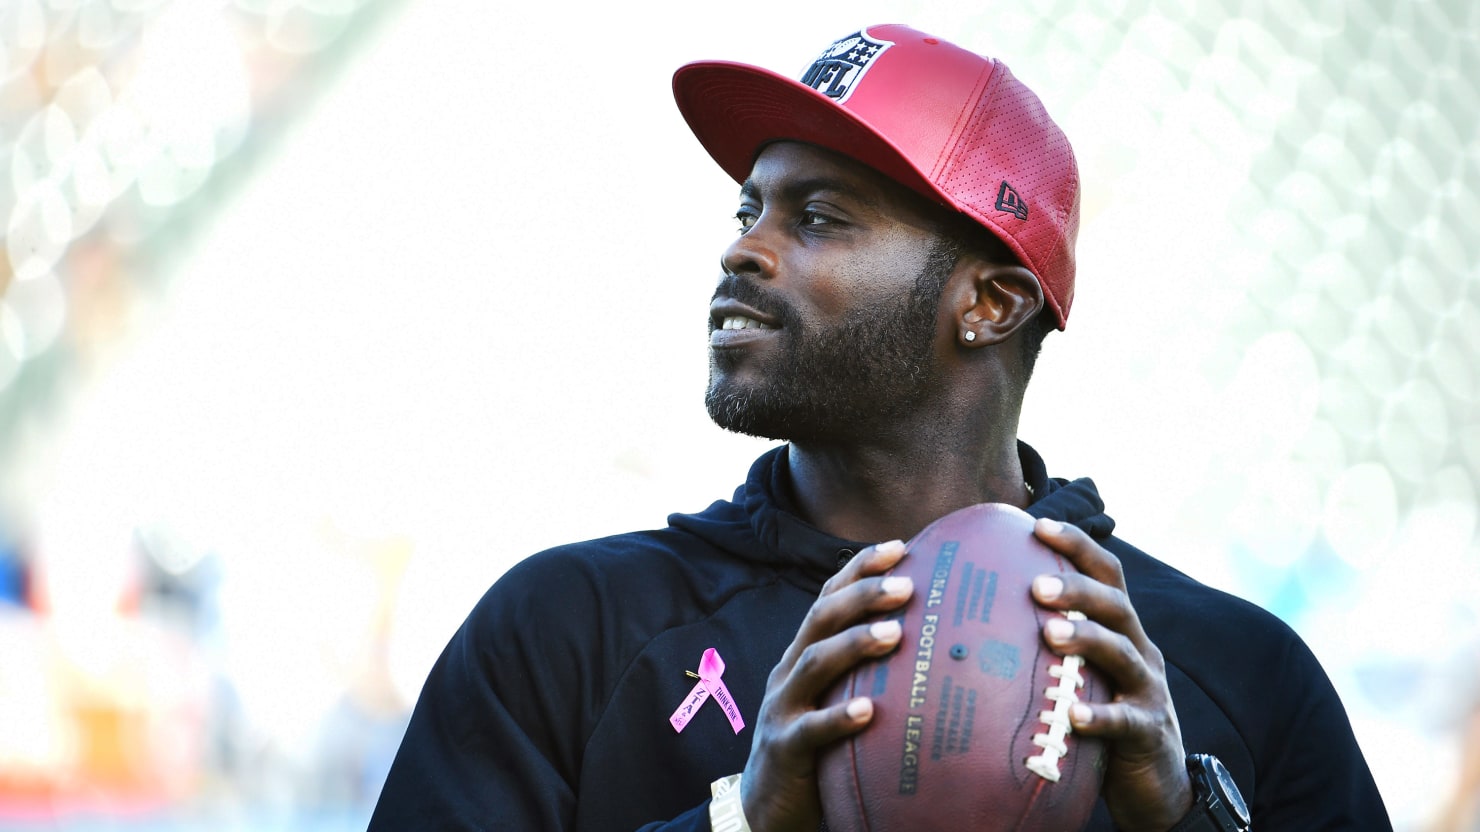 ‘30 for 30 Michael Vick’ on ESPN Explores How Racism Helped Ruin the